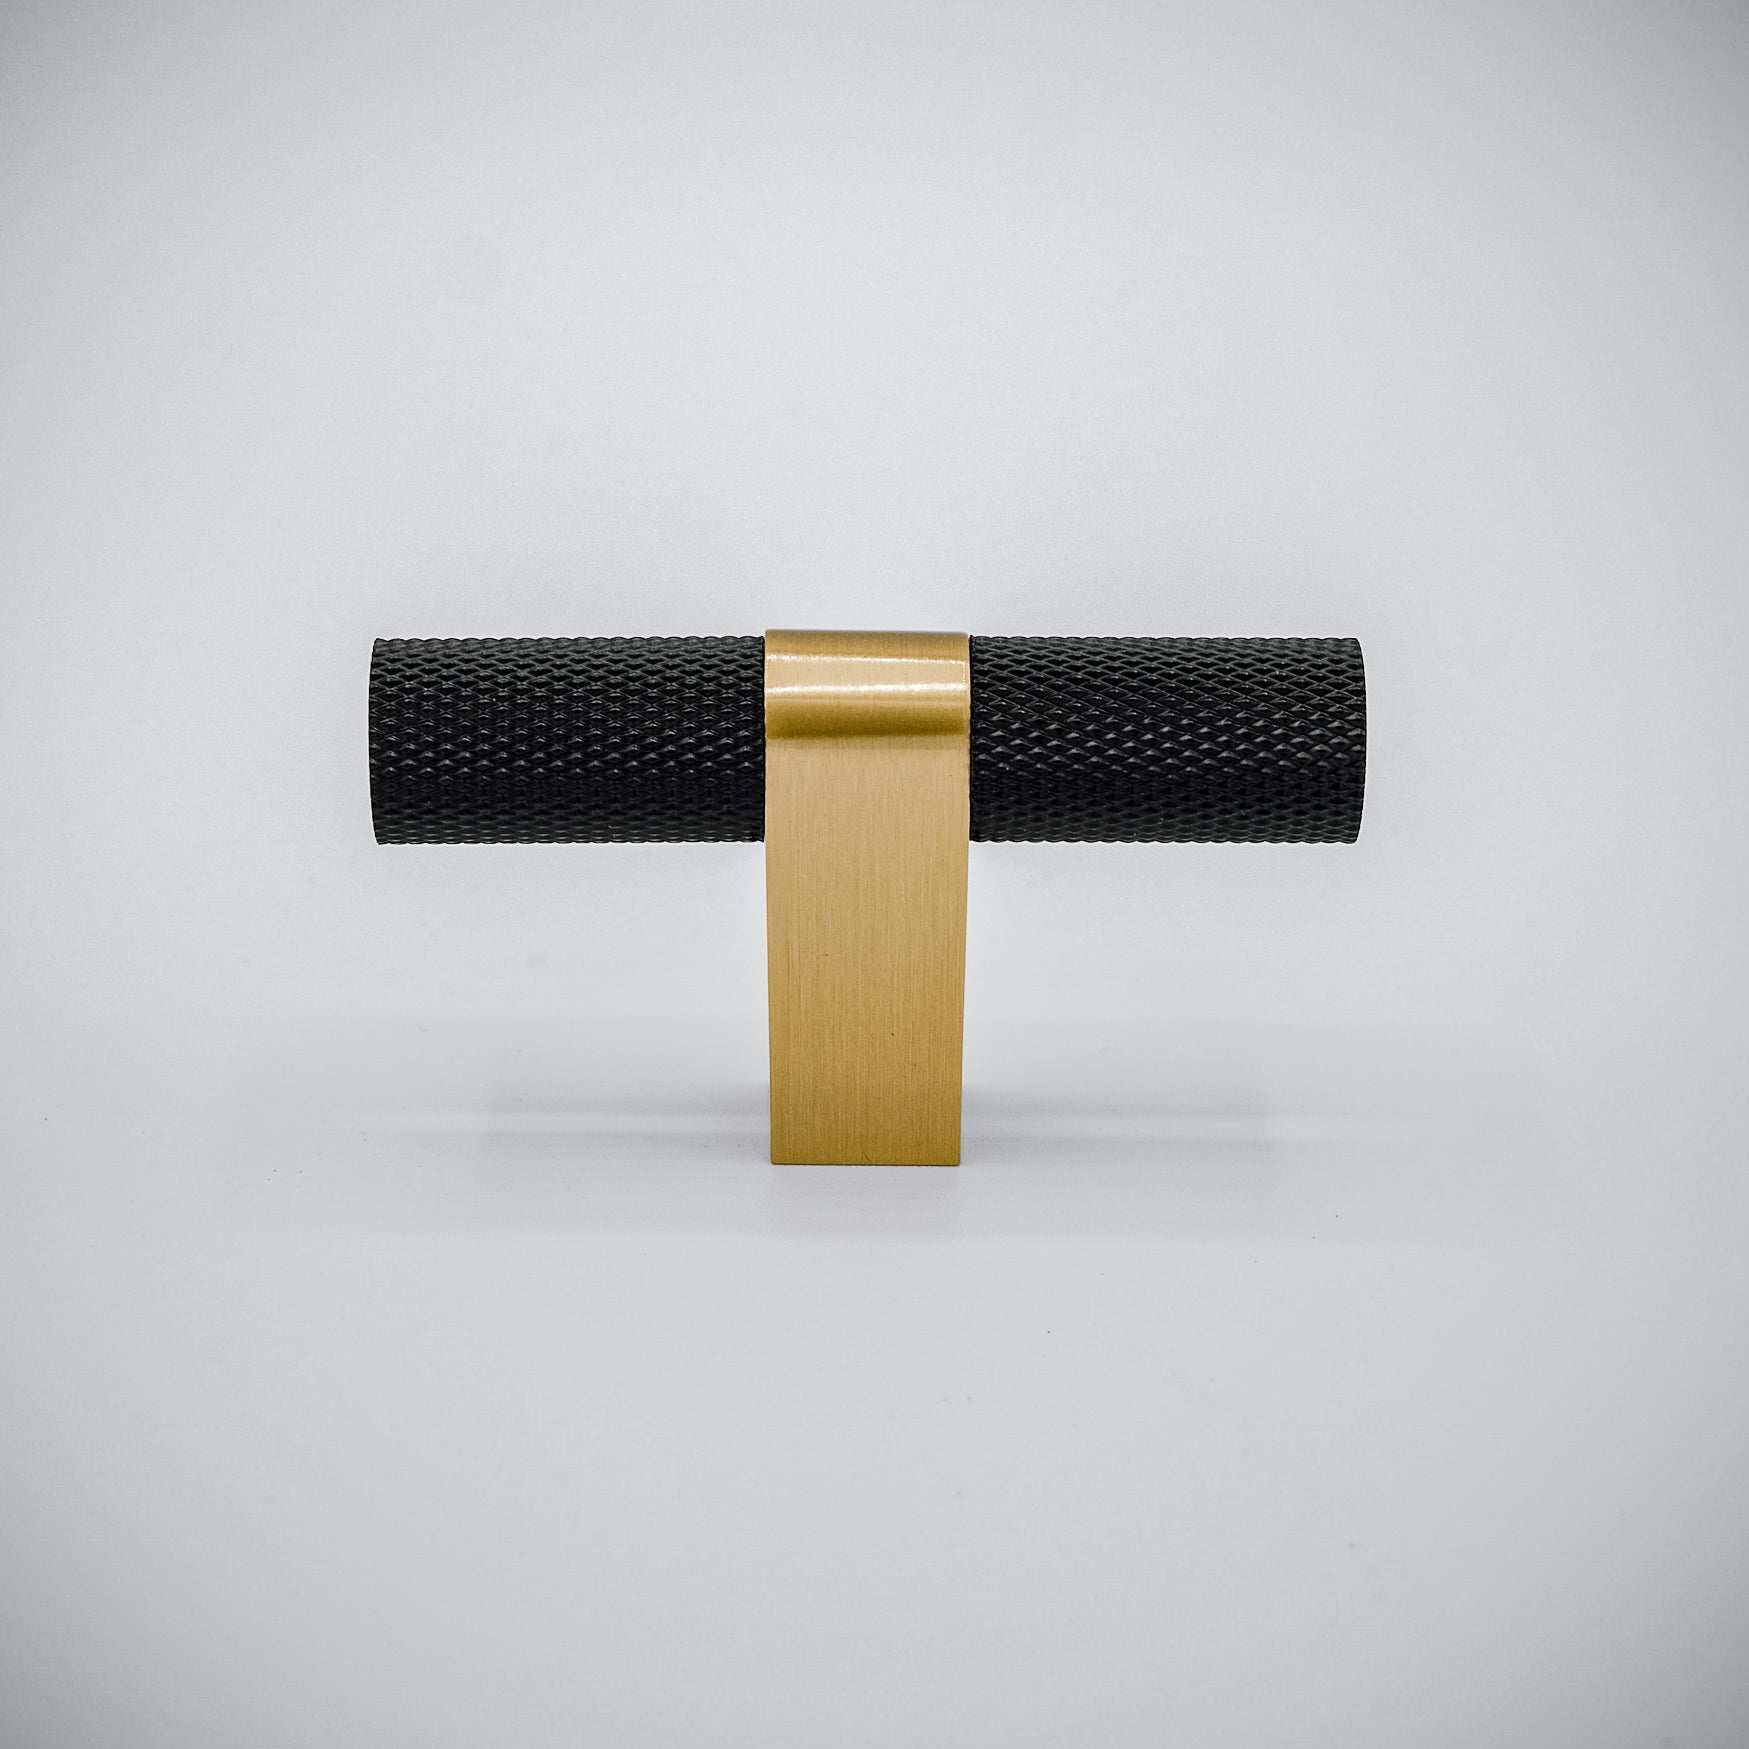 Modern Knurled Cabinet Pulls and Knobs